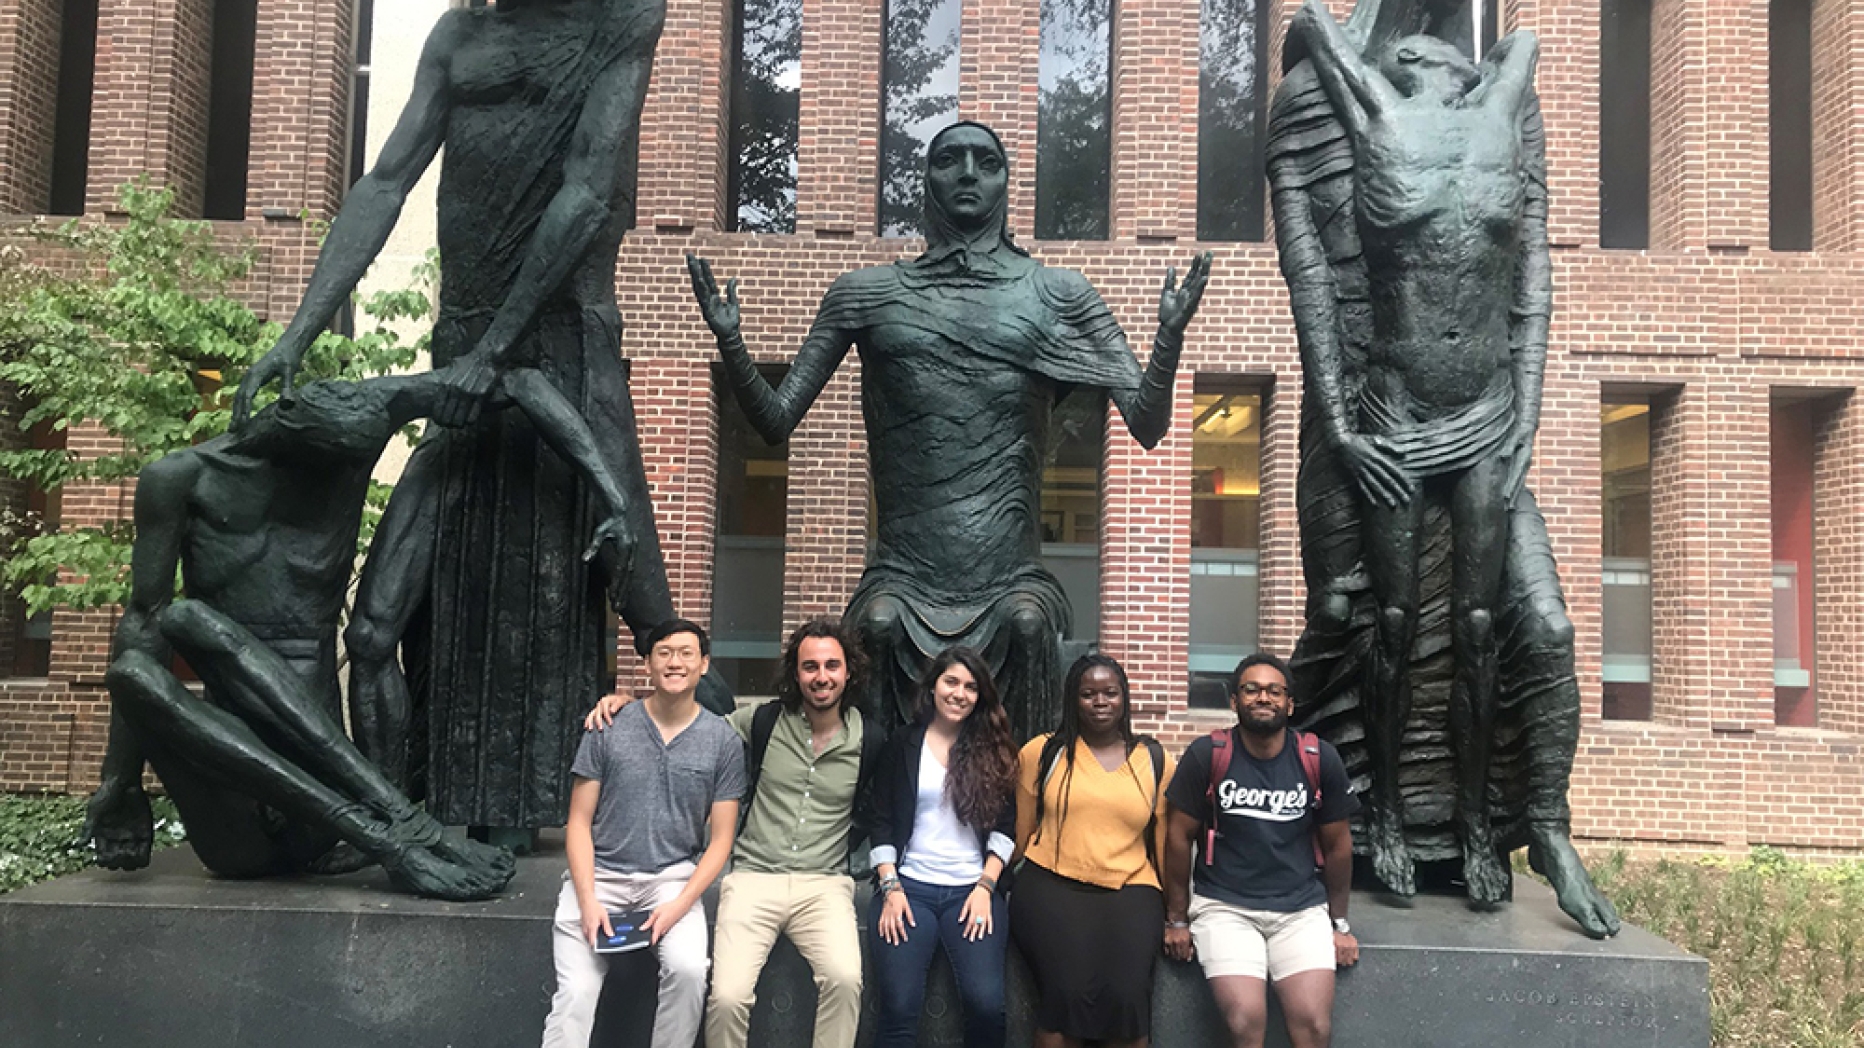 5 diverse individuals with statues of human suffering in the background